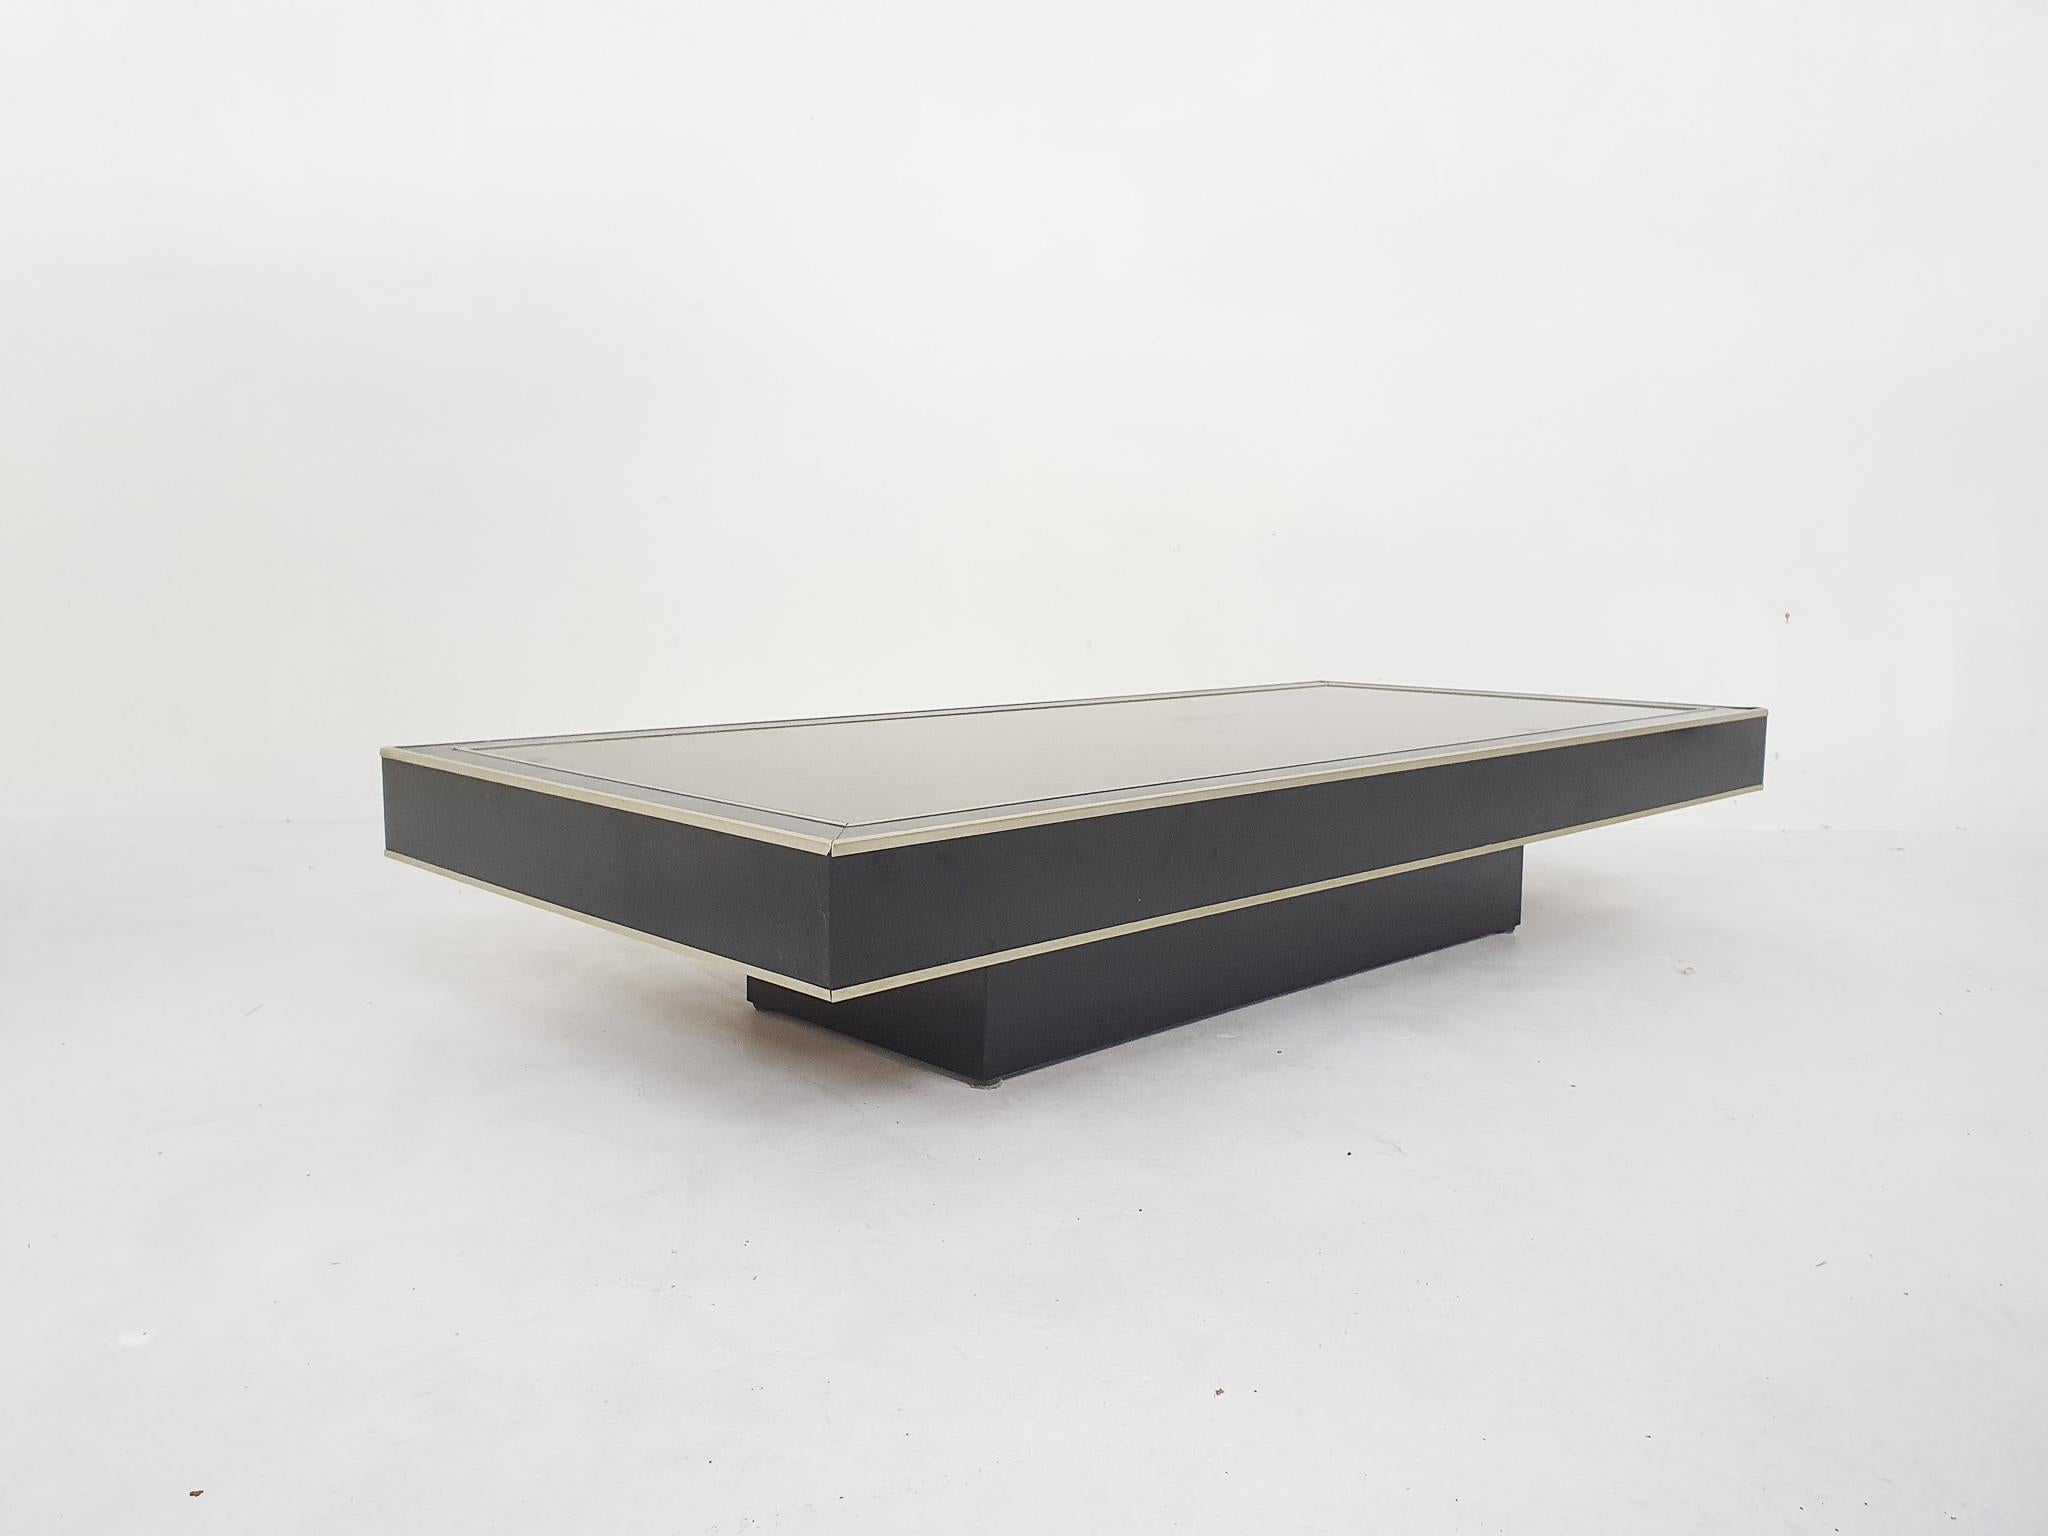 Late 20th Century Willy Rizzo Attrb. Mirrored Coffee Table, Belgium 1970's